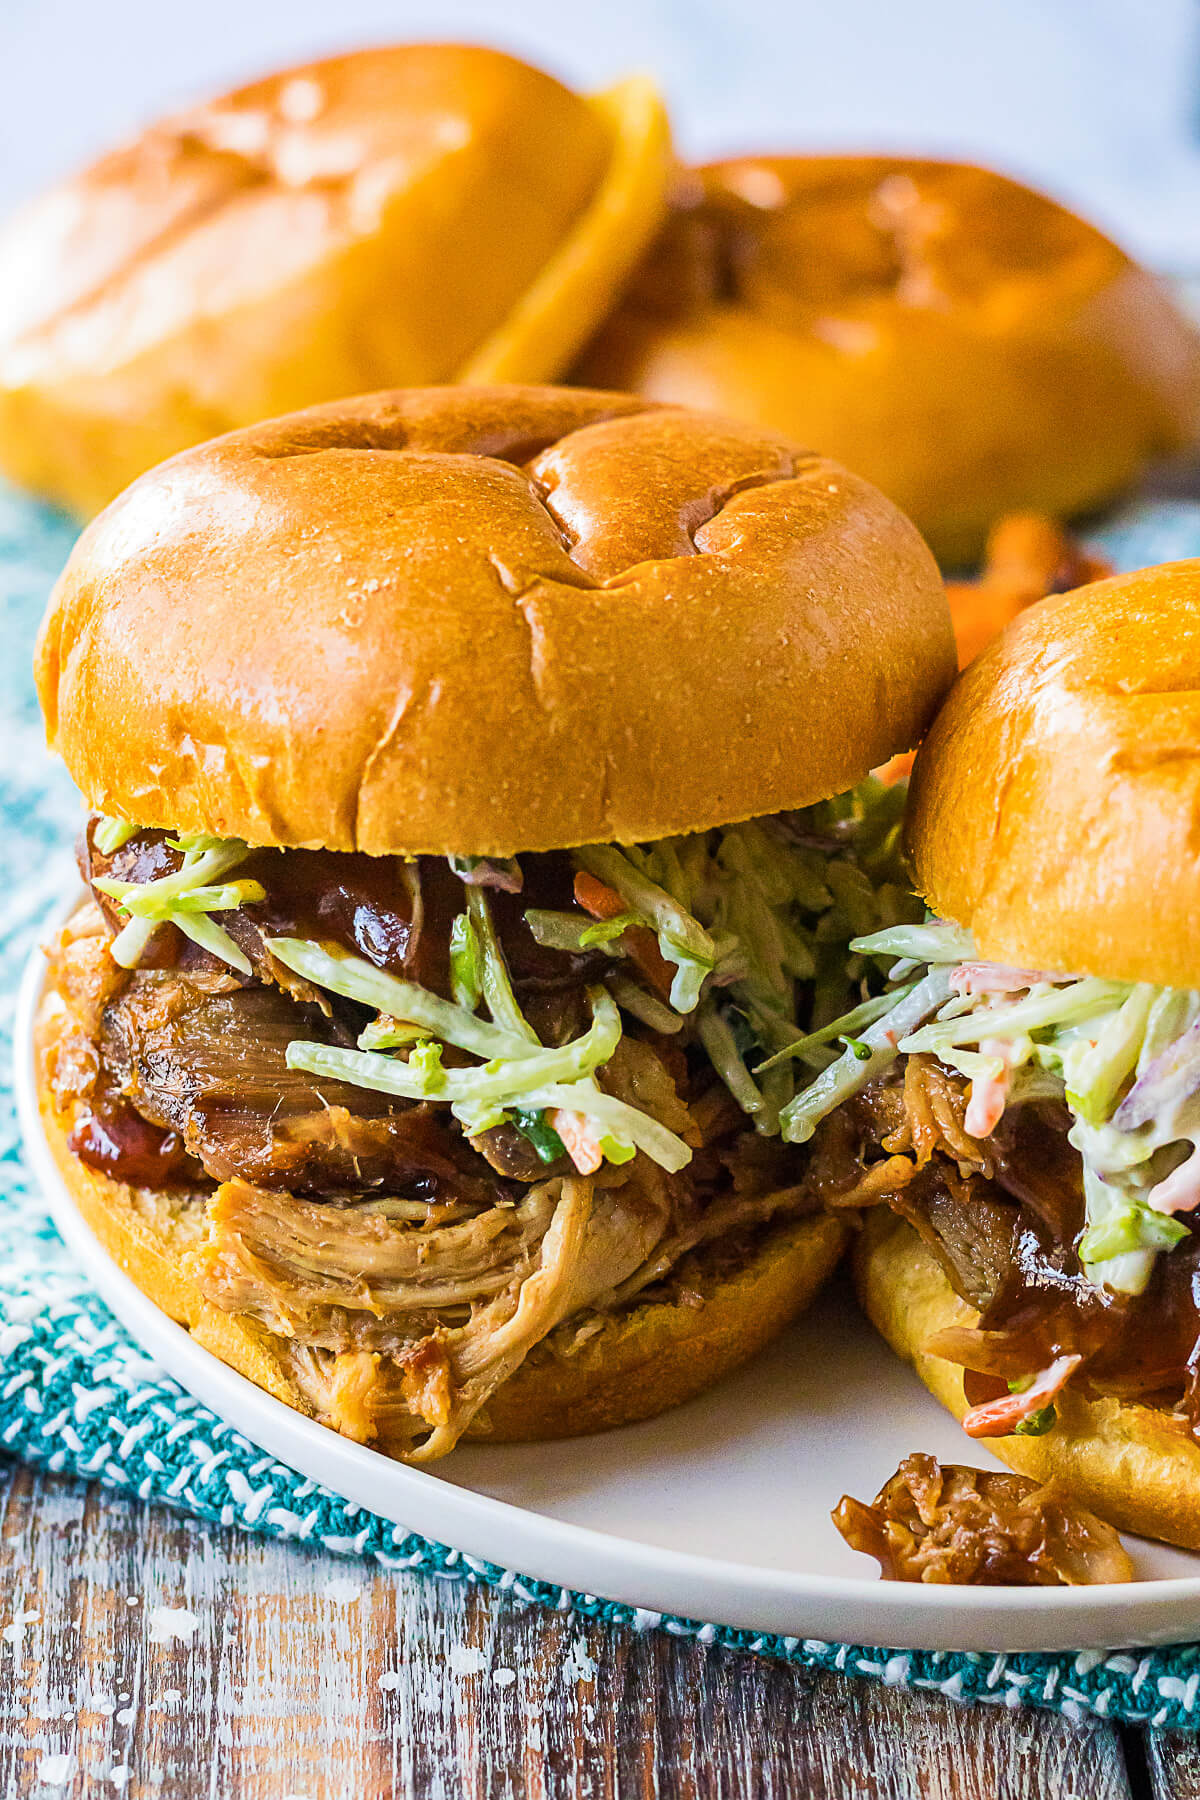 Soft white buns filled with Root Beer Pulled Pork and coleslaw.